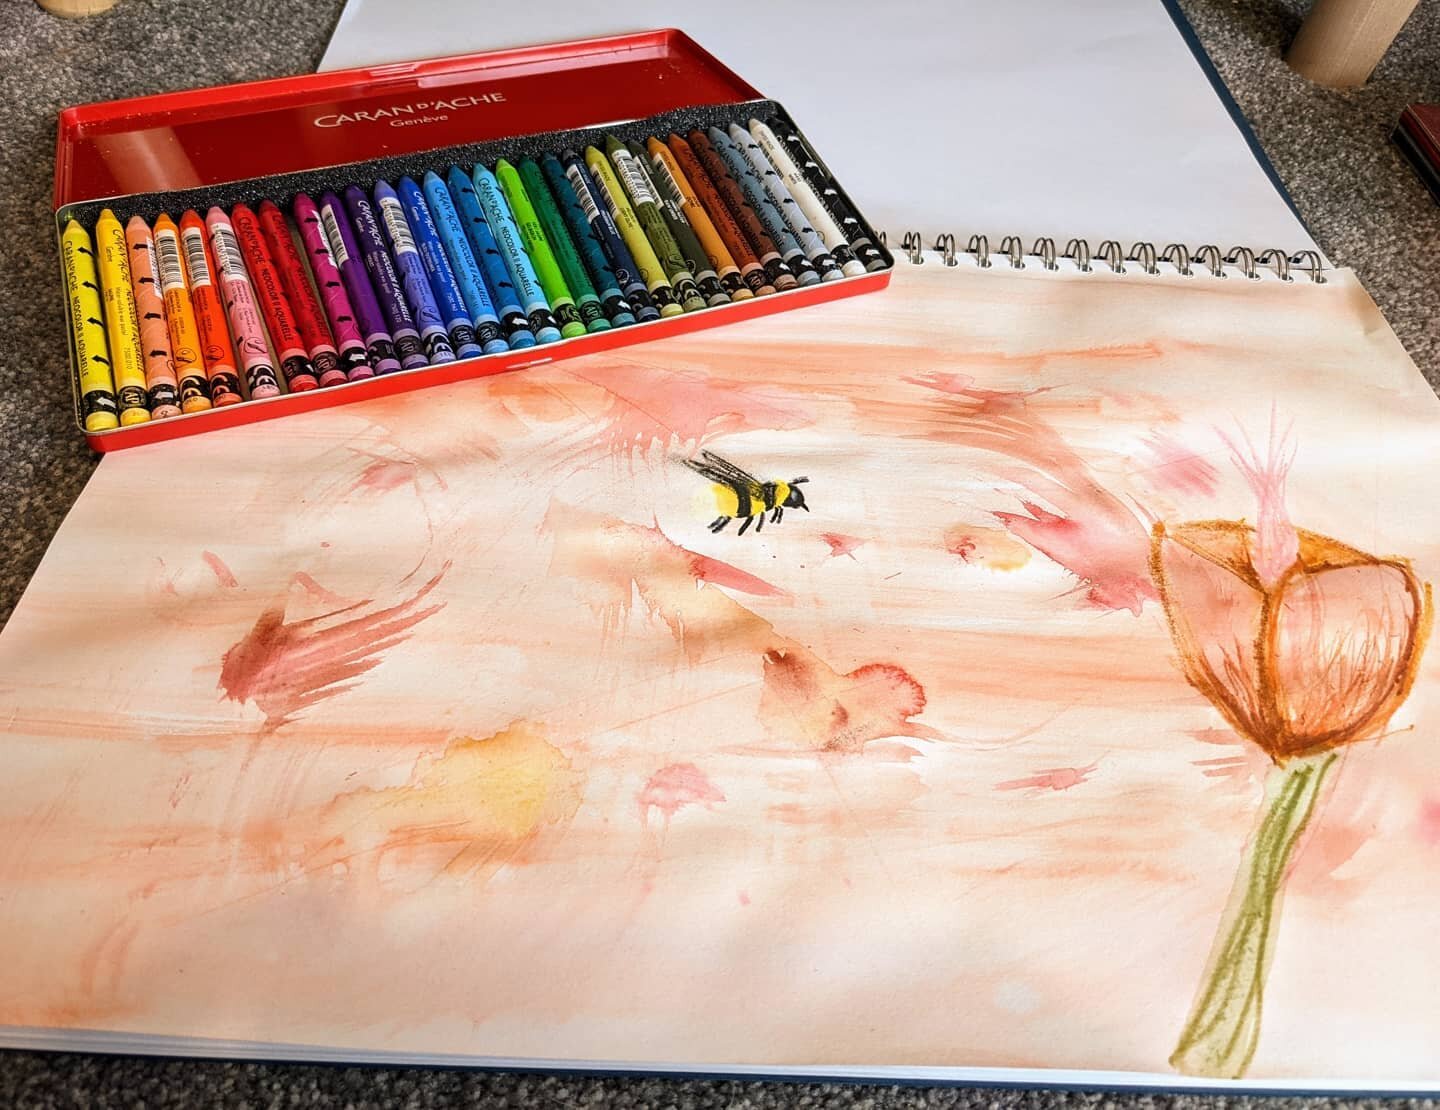 Having a quick play with a new resource. Carson D'ache neocolour II aquarelle crayons (water soluble crayons). They're great fun and easy to use. I love having a wide range of accessible art materials for my clients #counselling #creativity #art #the